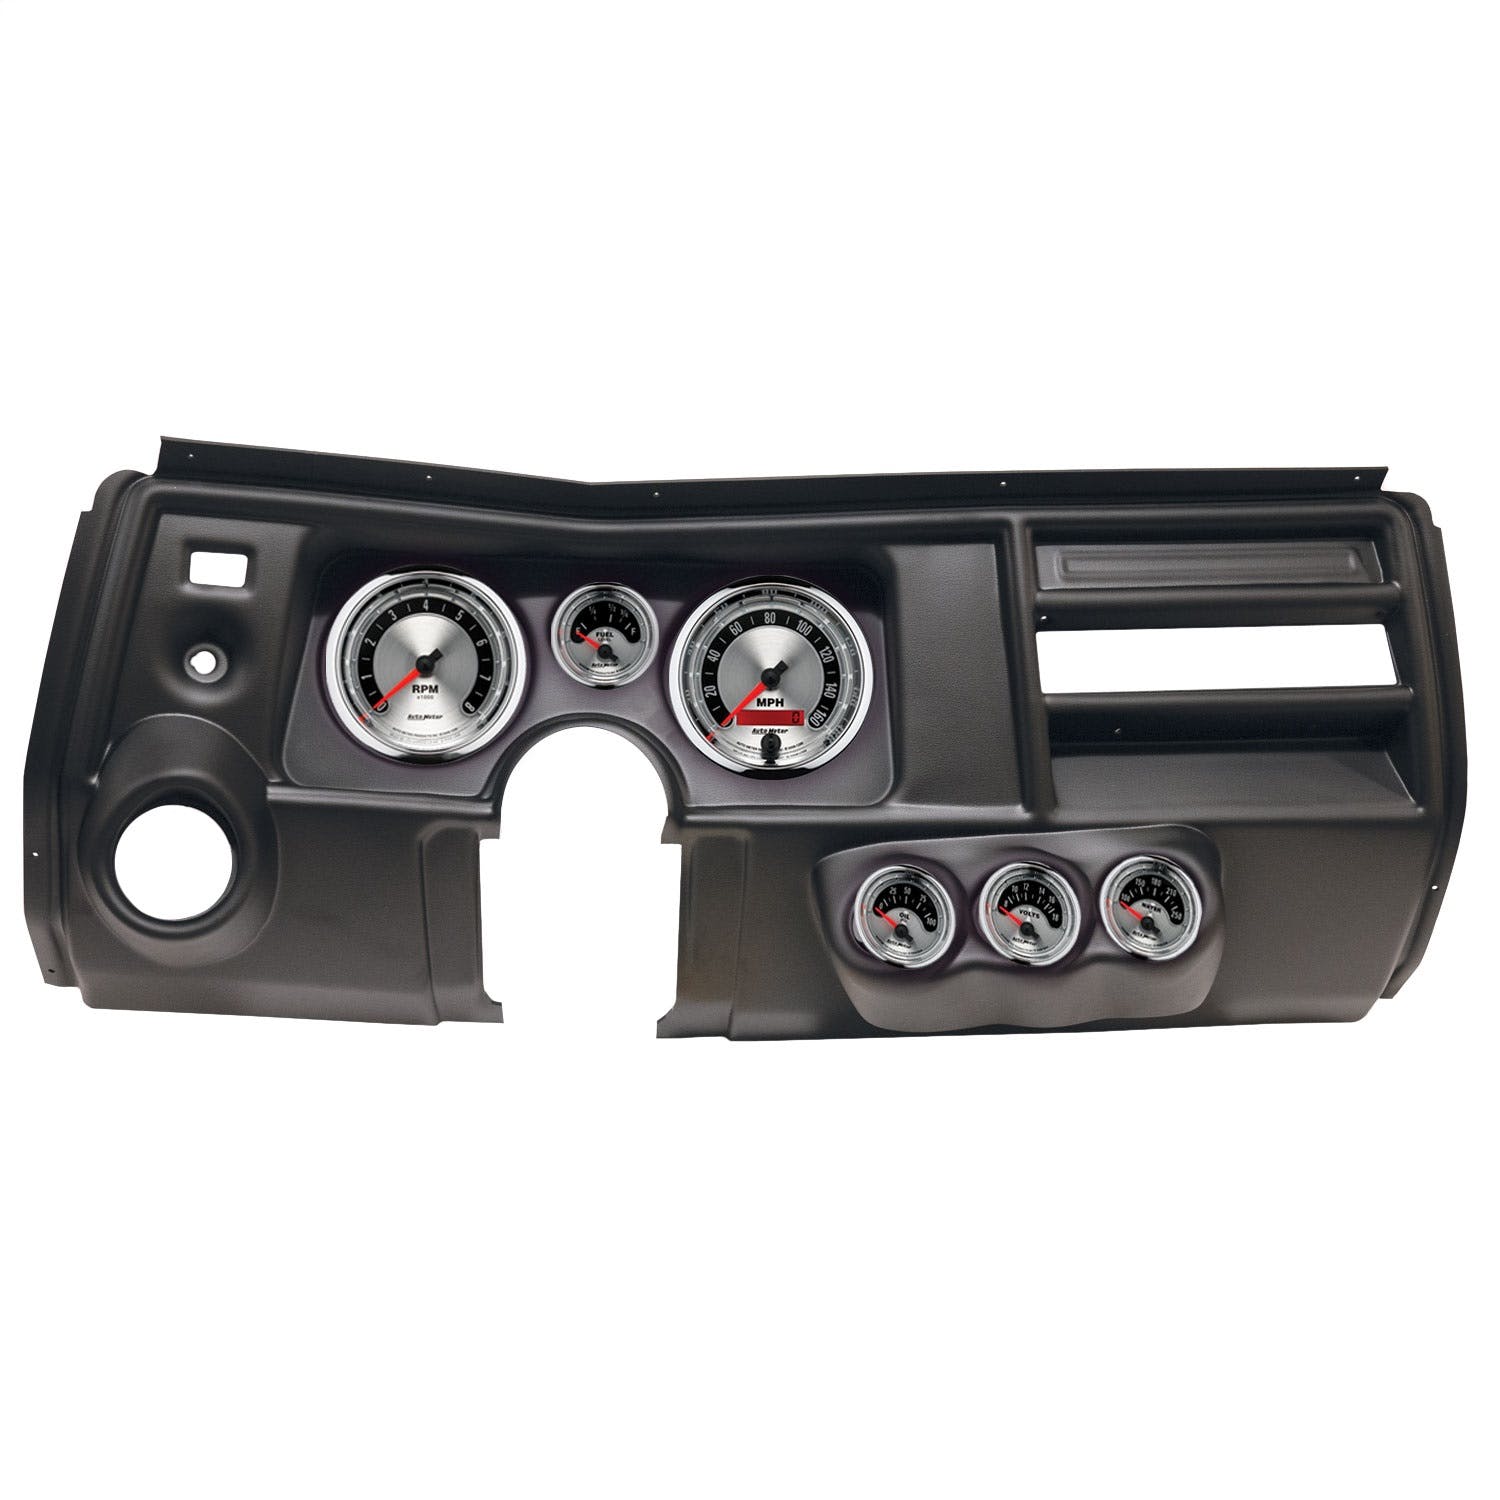 AutoMeter Products 2911-01 6 Gauge Direct-Fit Dash Kit, Chevy Chevelle Vent 69, American Muscle